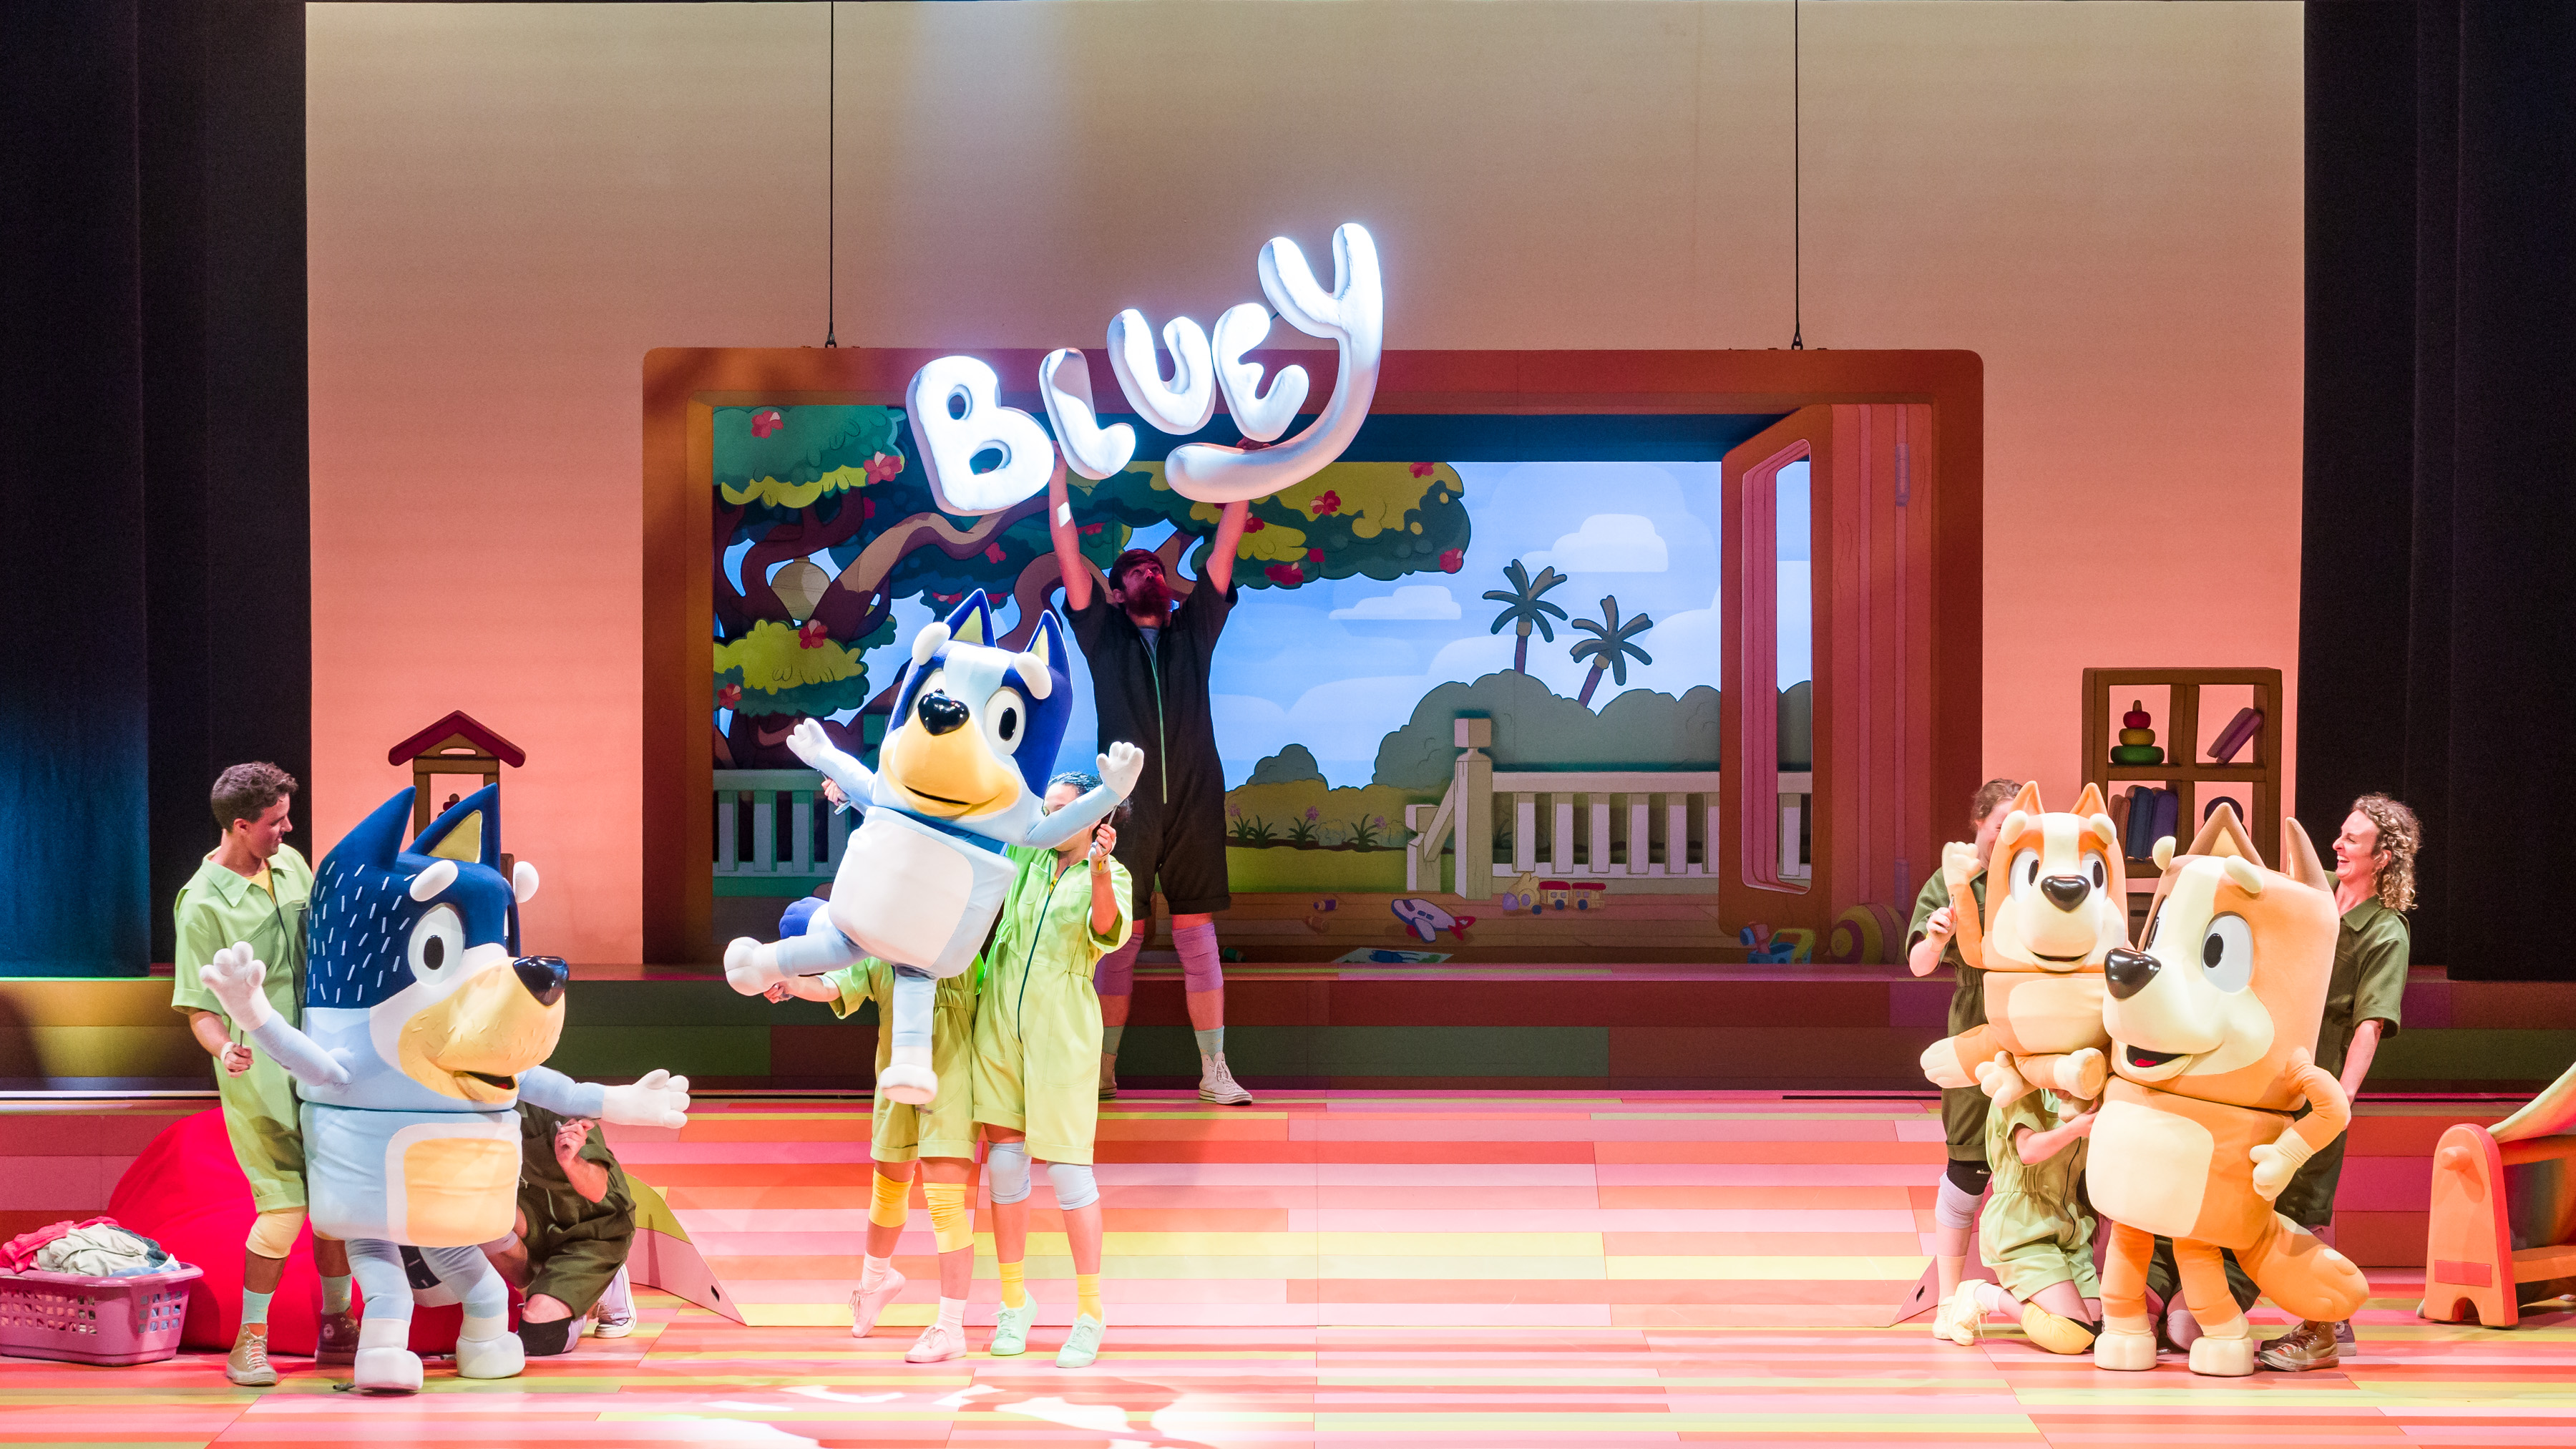 Bluey puppets on stage dancing